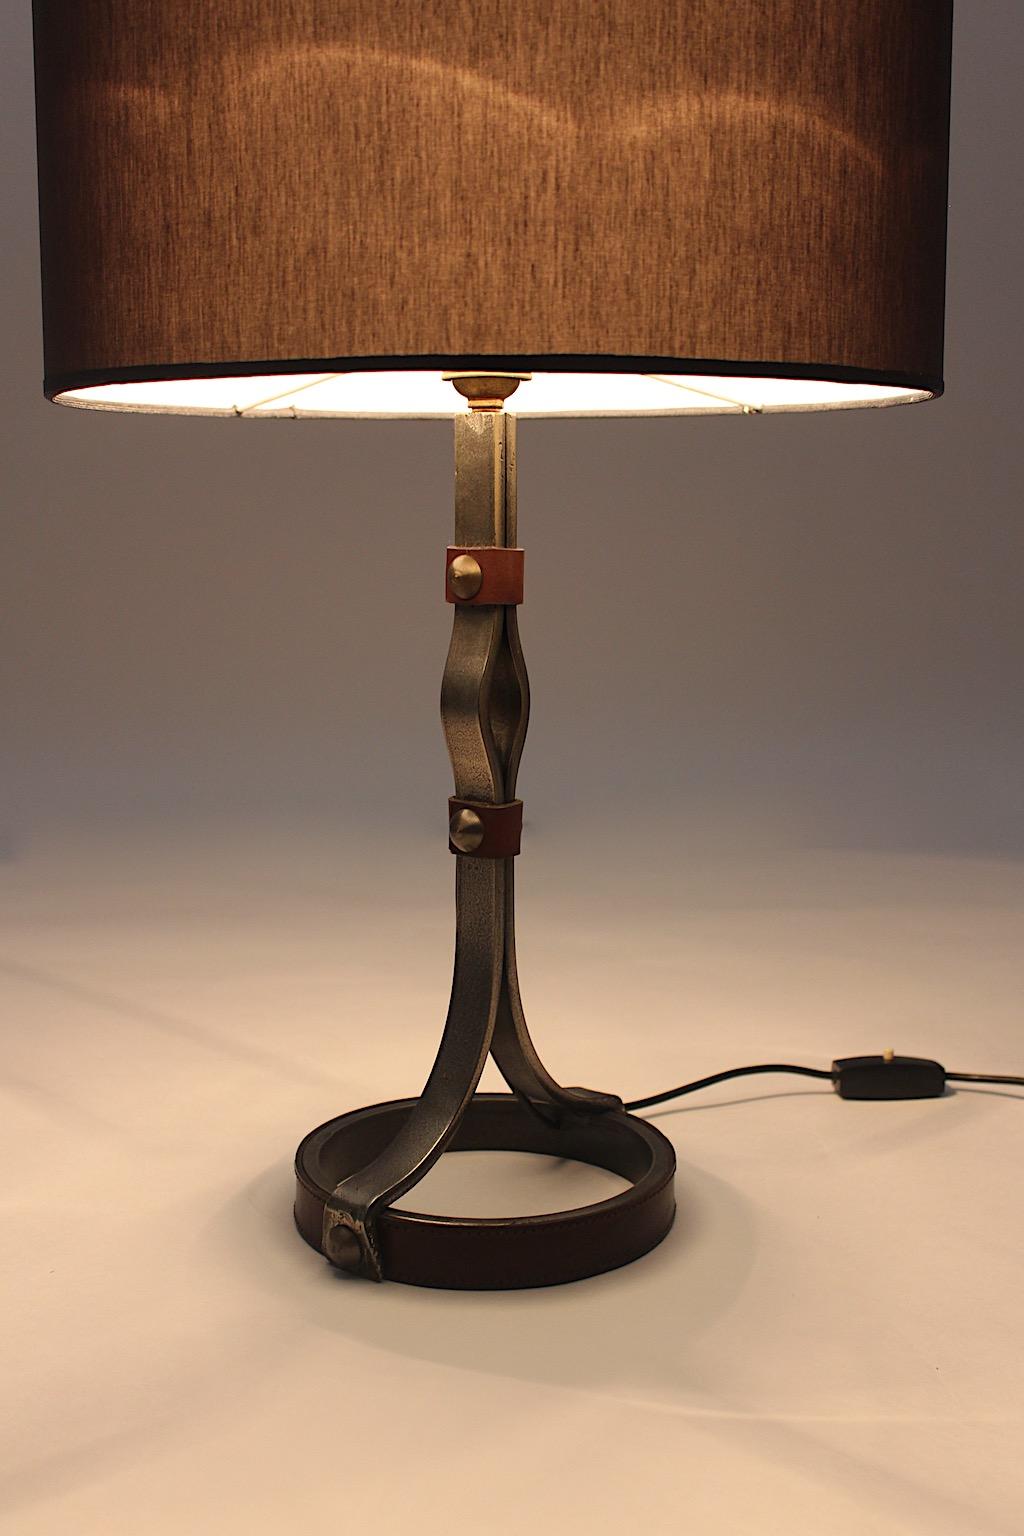 20th Century Mid-Century Modern Jacques Adnet Iron Leather Table Lamp France 1950s For Sale